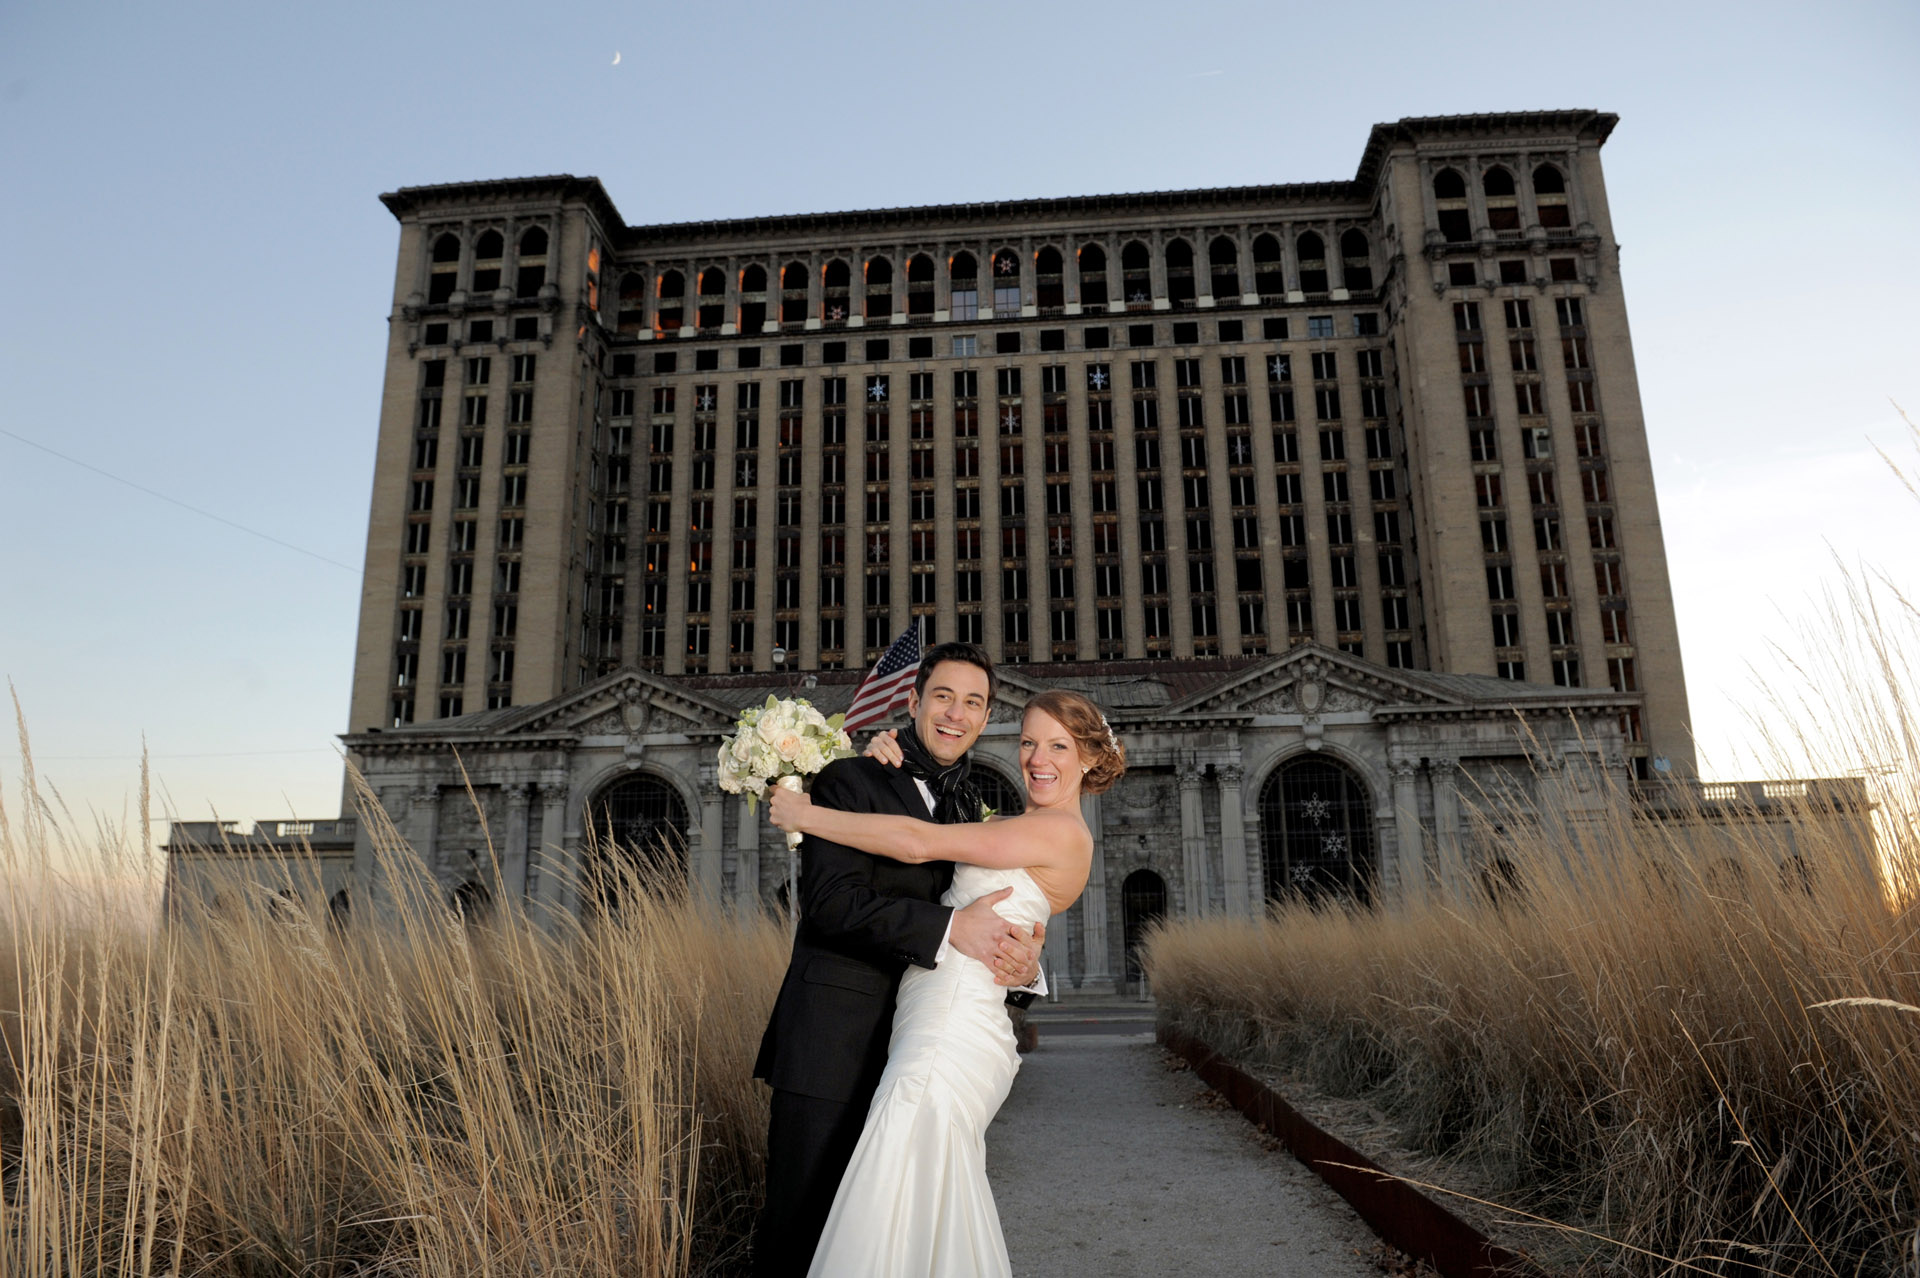 The Historic church Sweetest Heart of Mary and the Dearborn Inn of Detroit's historic church in Detroit and Dearborn, Michigan wedding photographer's photo of the the bride and groom at Detroit's historic train station for wedding photos in Detroit, Michigan.